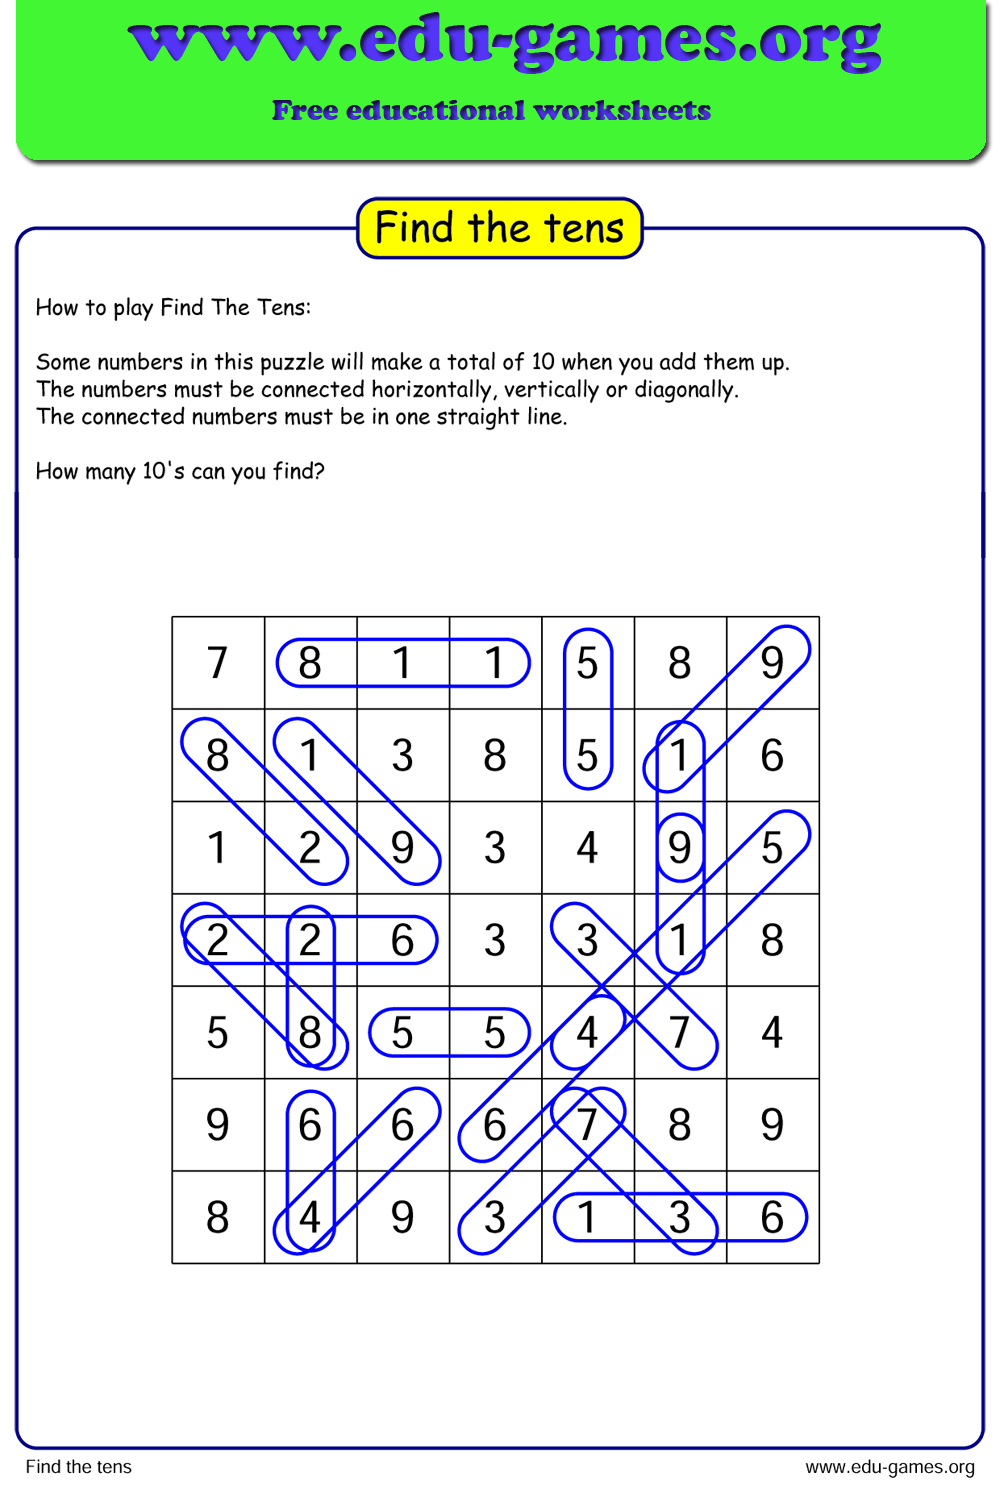 Find The Tens Puzzle Maker | The Site for Free Printable Worksheets